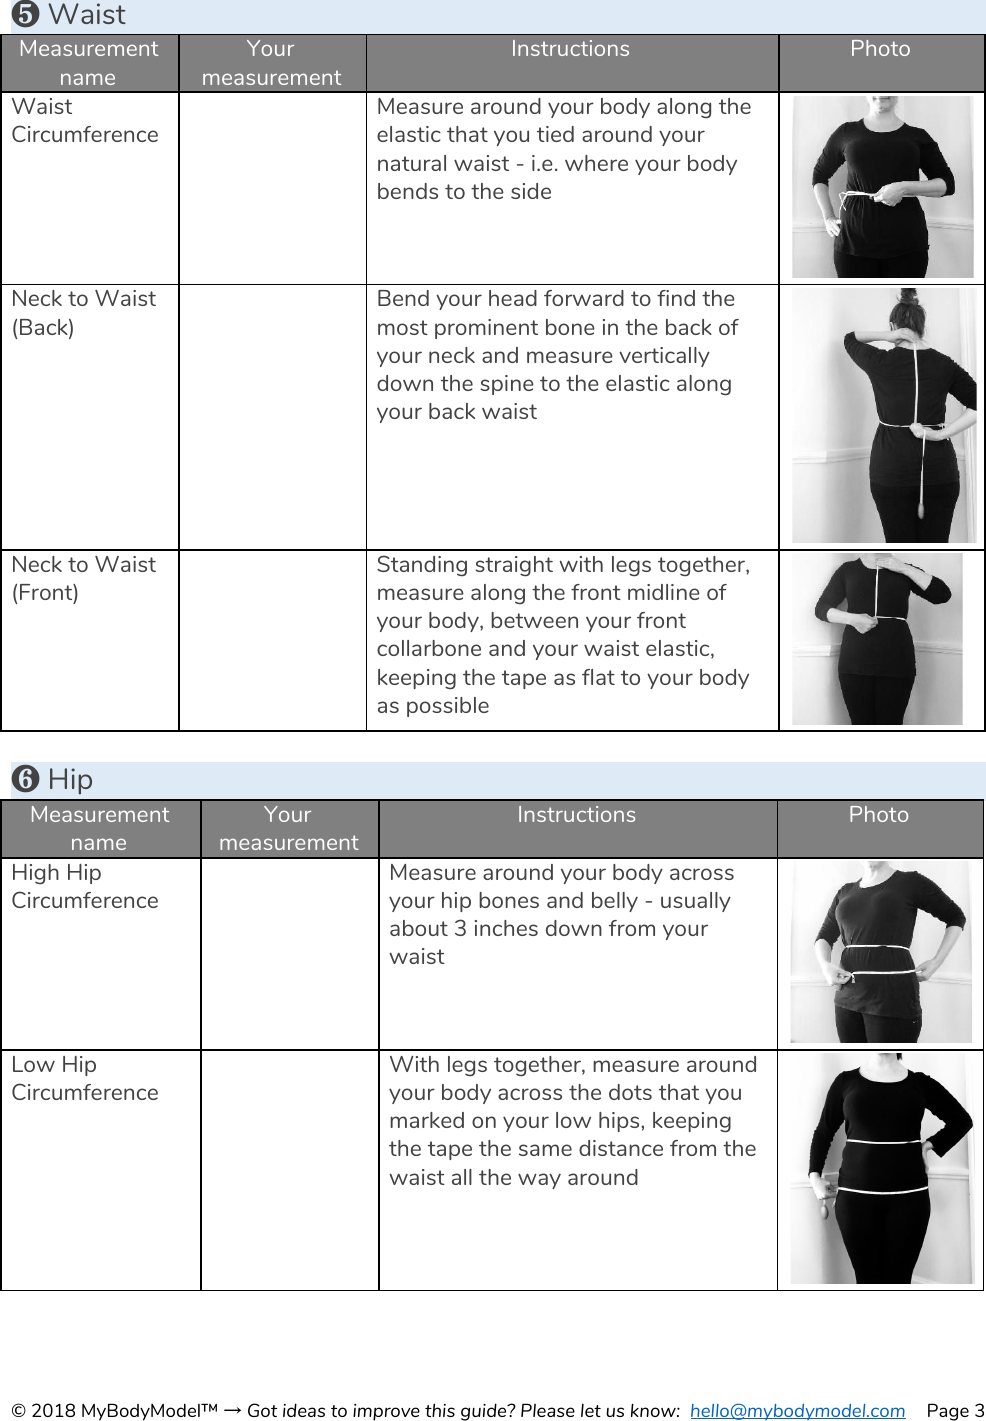 Page 3 of 4 - Measurement-instructions